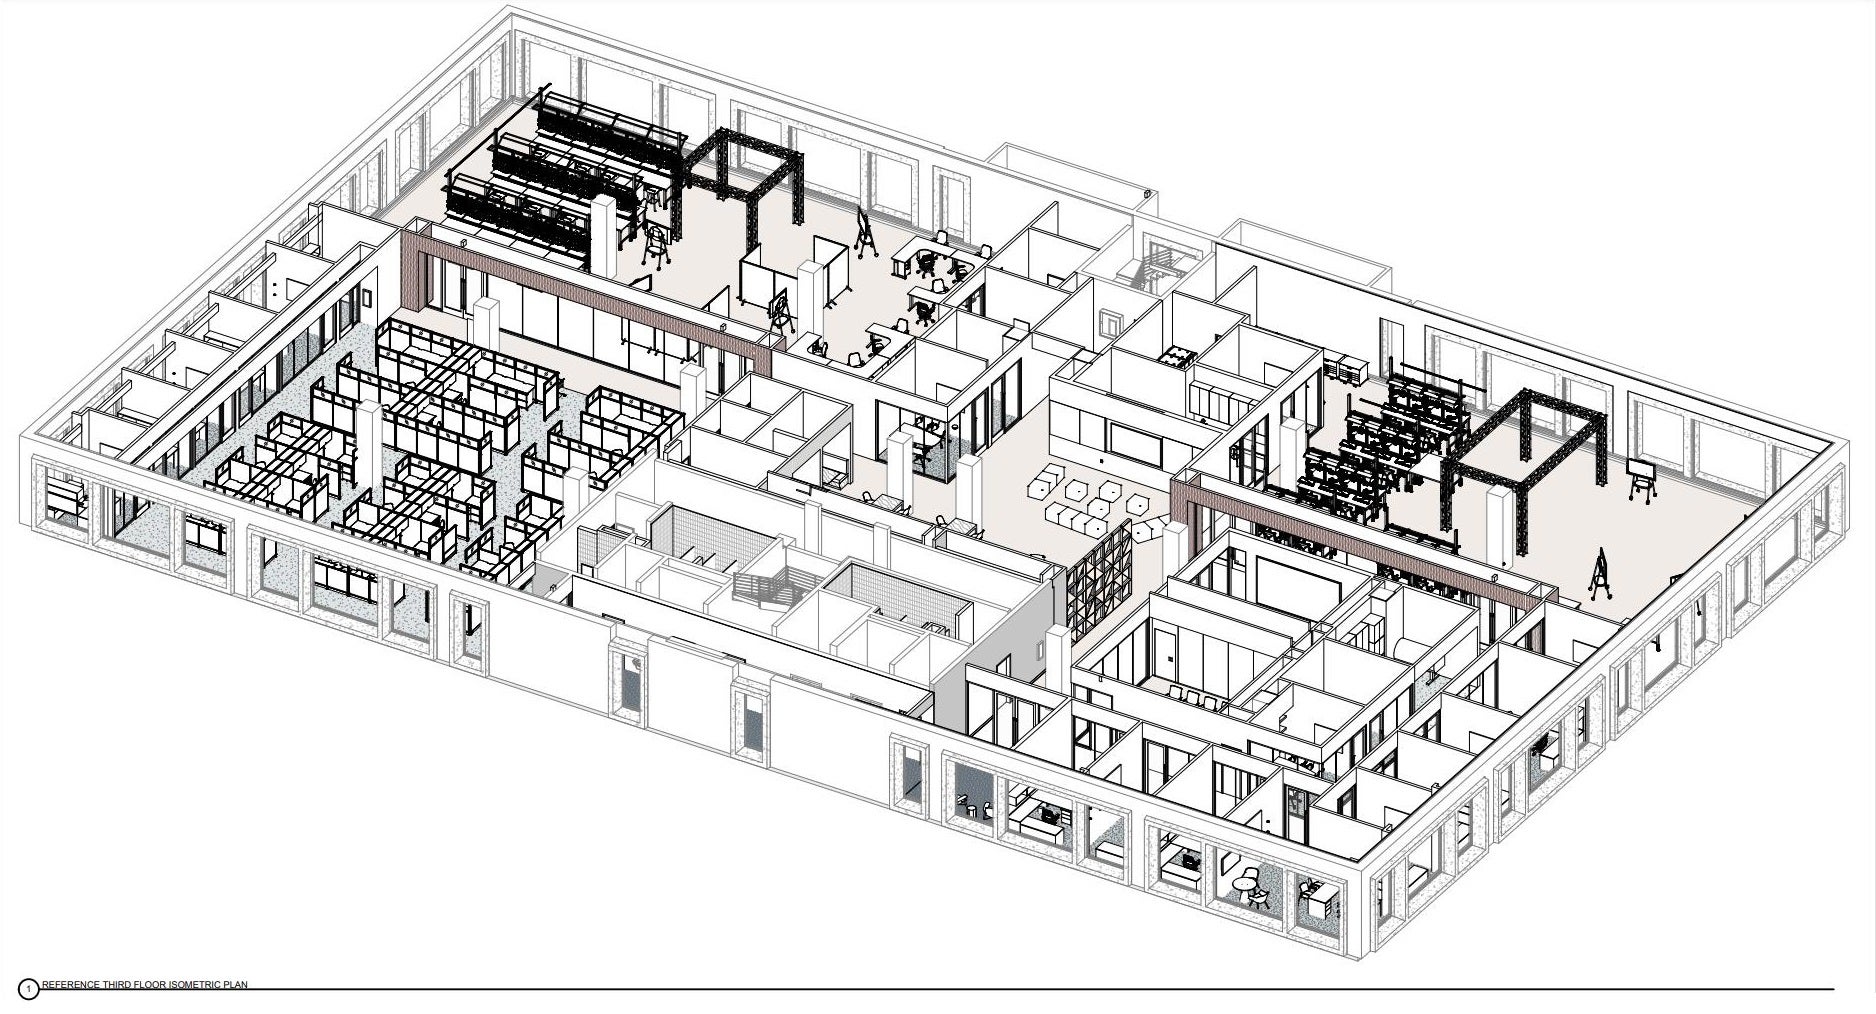 A floorplan of the proposed new Human Fusions Lab space